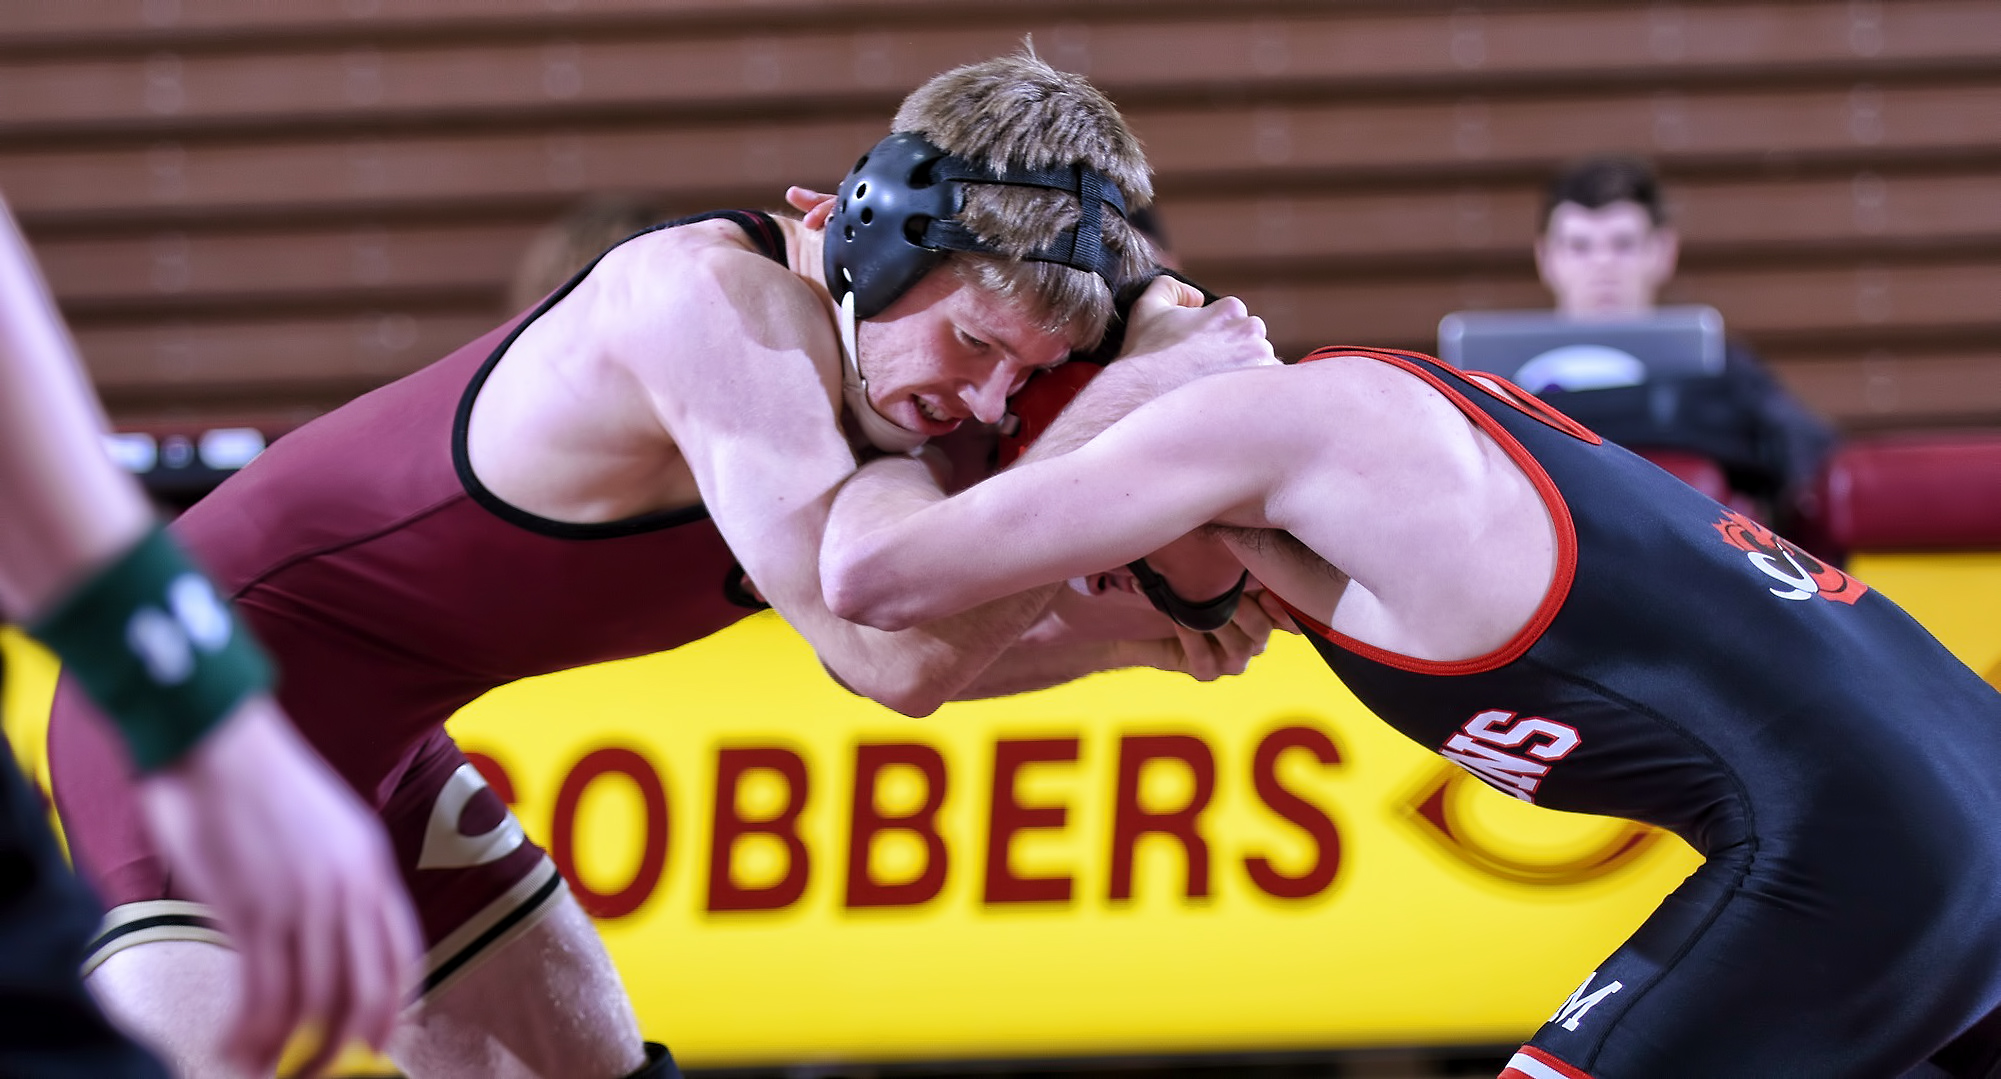 After sitting out the beginning of the year with a knee injury, Benjamin Bogart saw his first action of the year at the Neb. Wesleyan Duals and helped the Cobbers go 3-0.